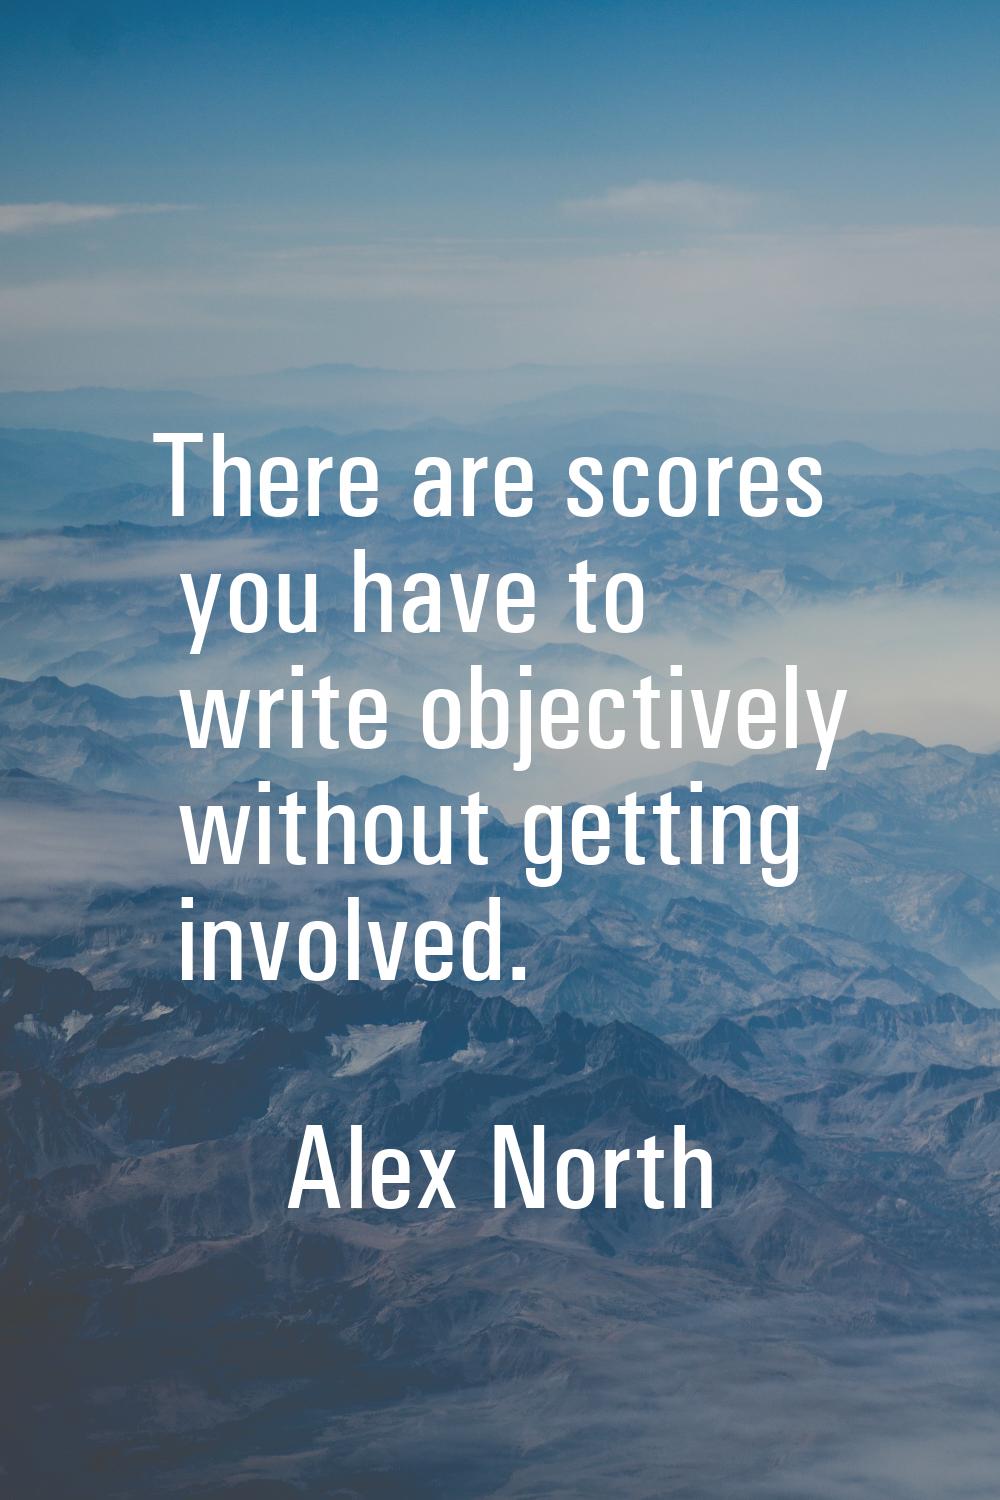 There are scores you have to write objectively without getting involved.